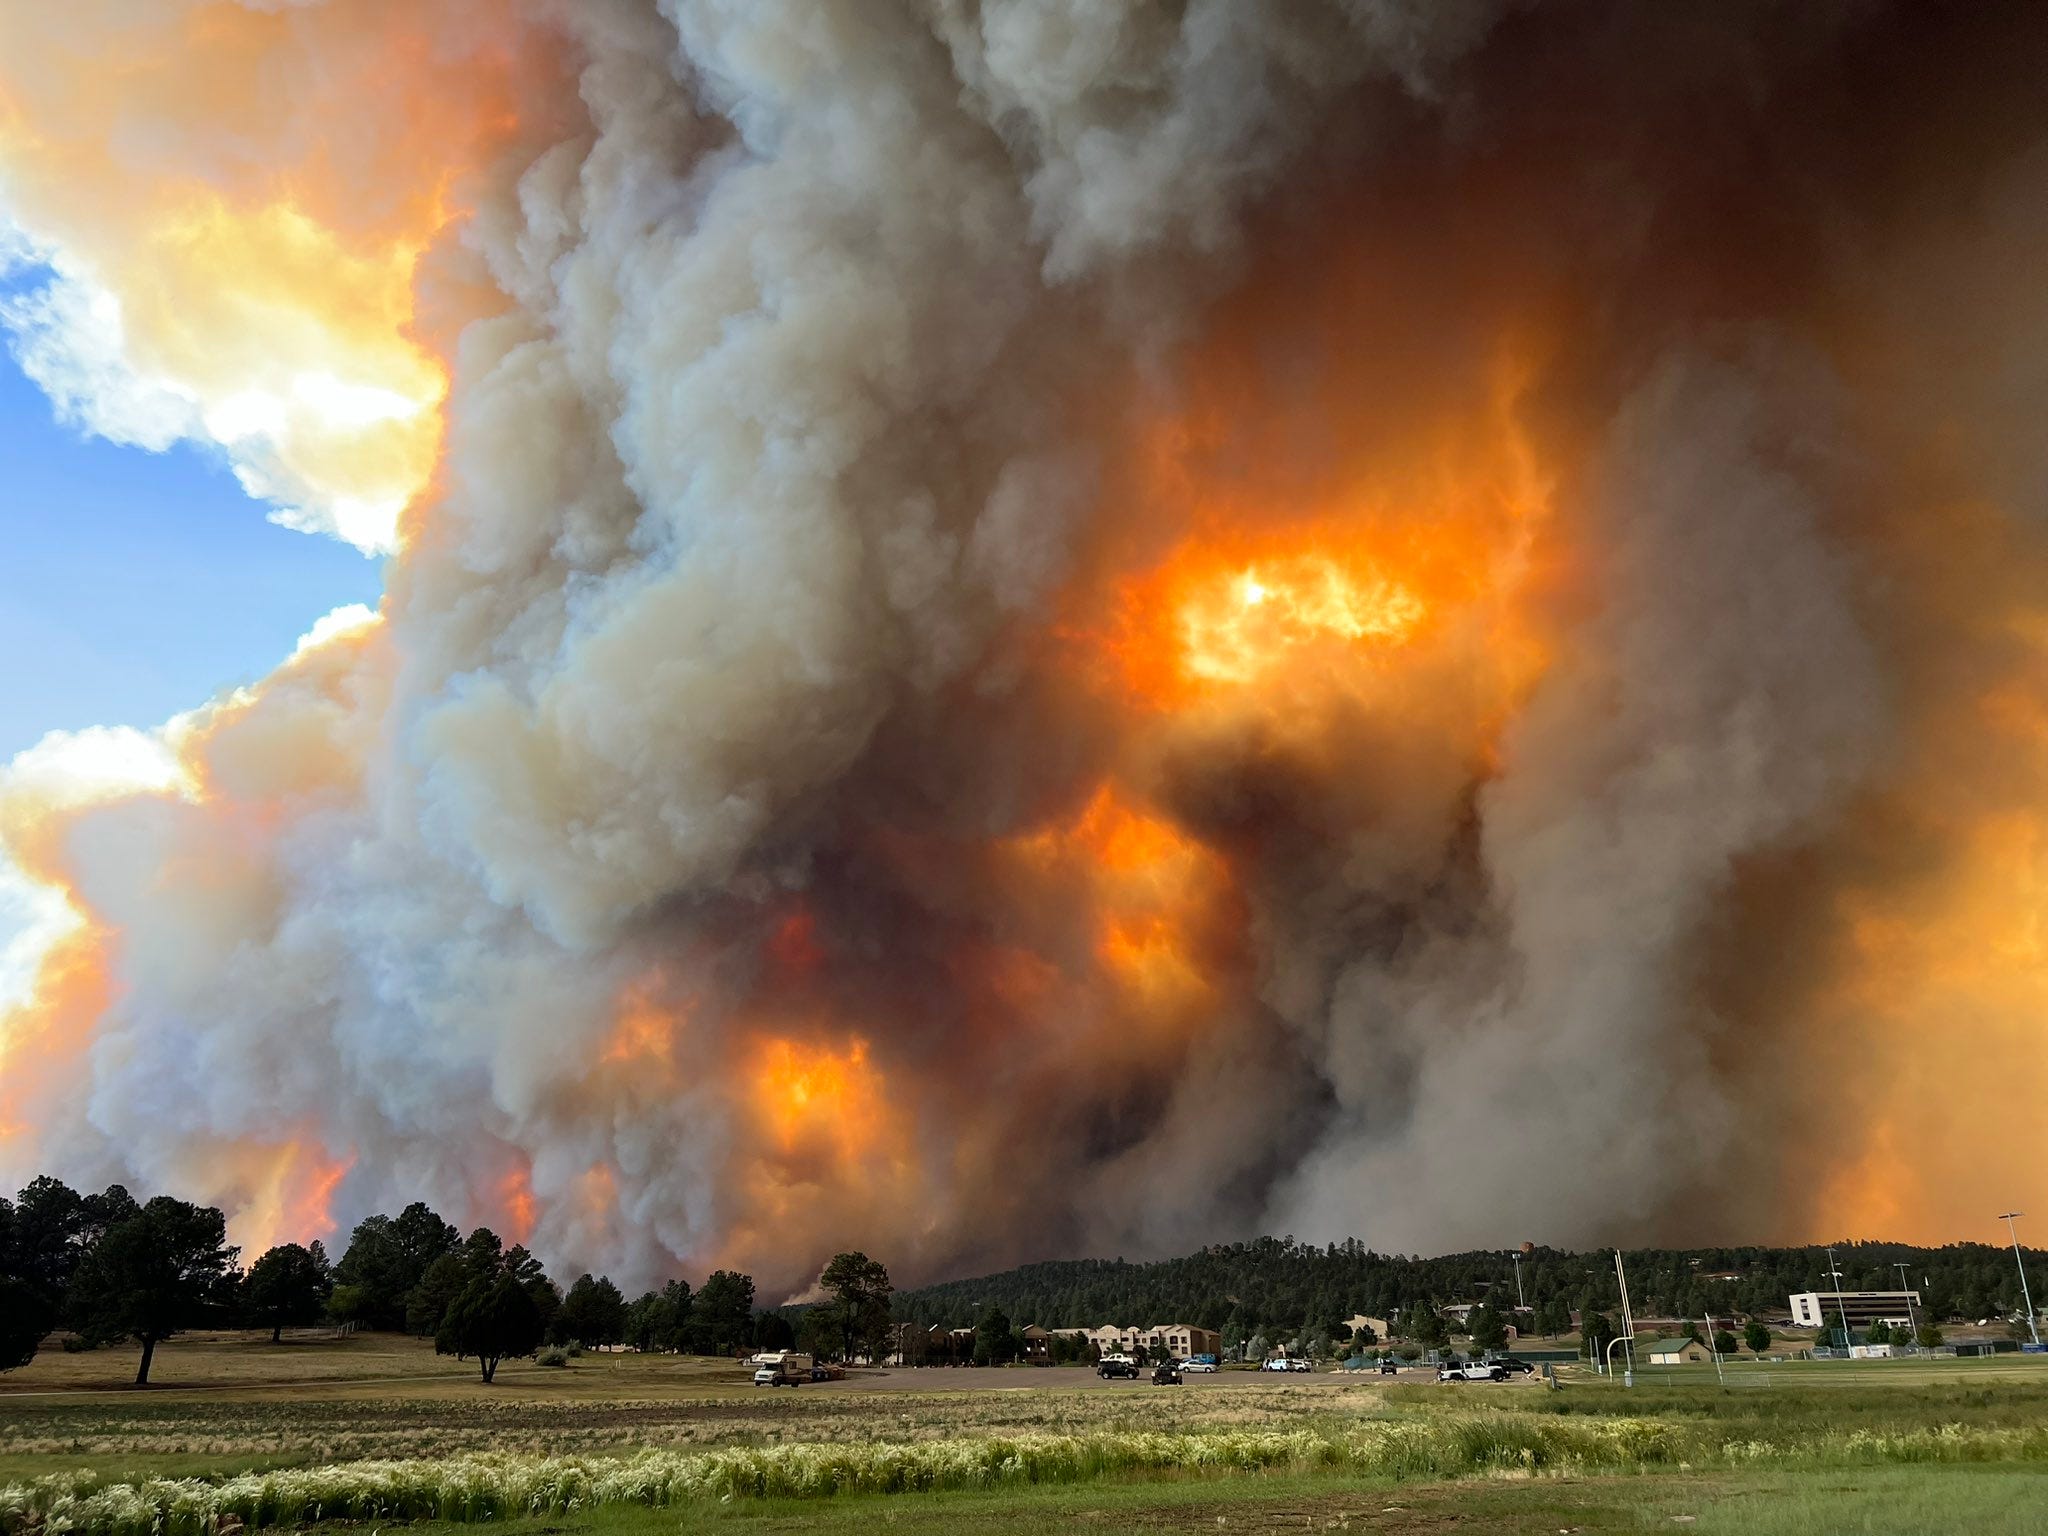 Tuesday ends with South Fork and Salt fires still uncontained after Ruidoso evacuated